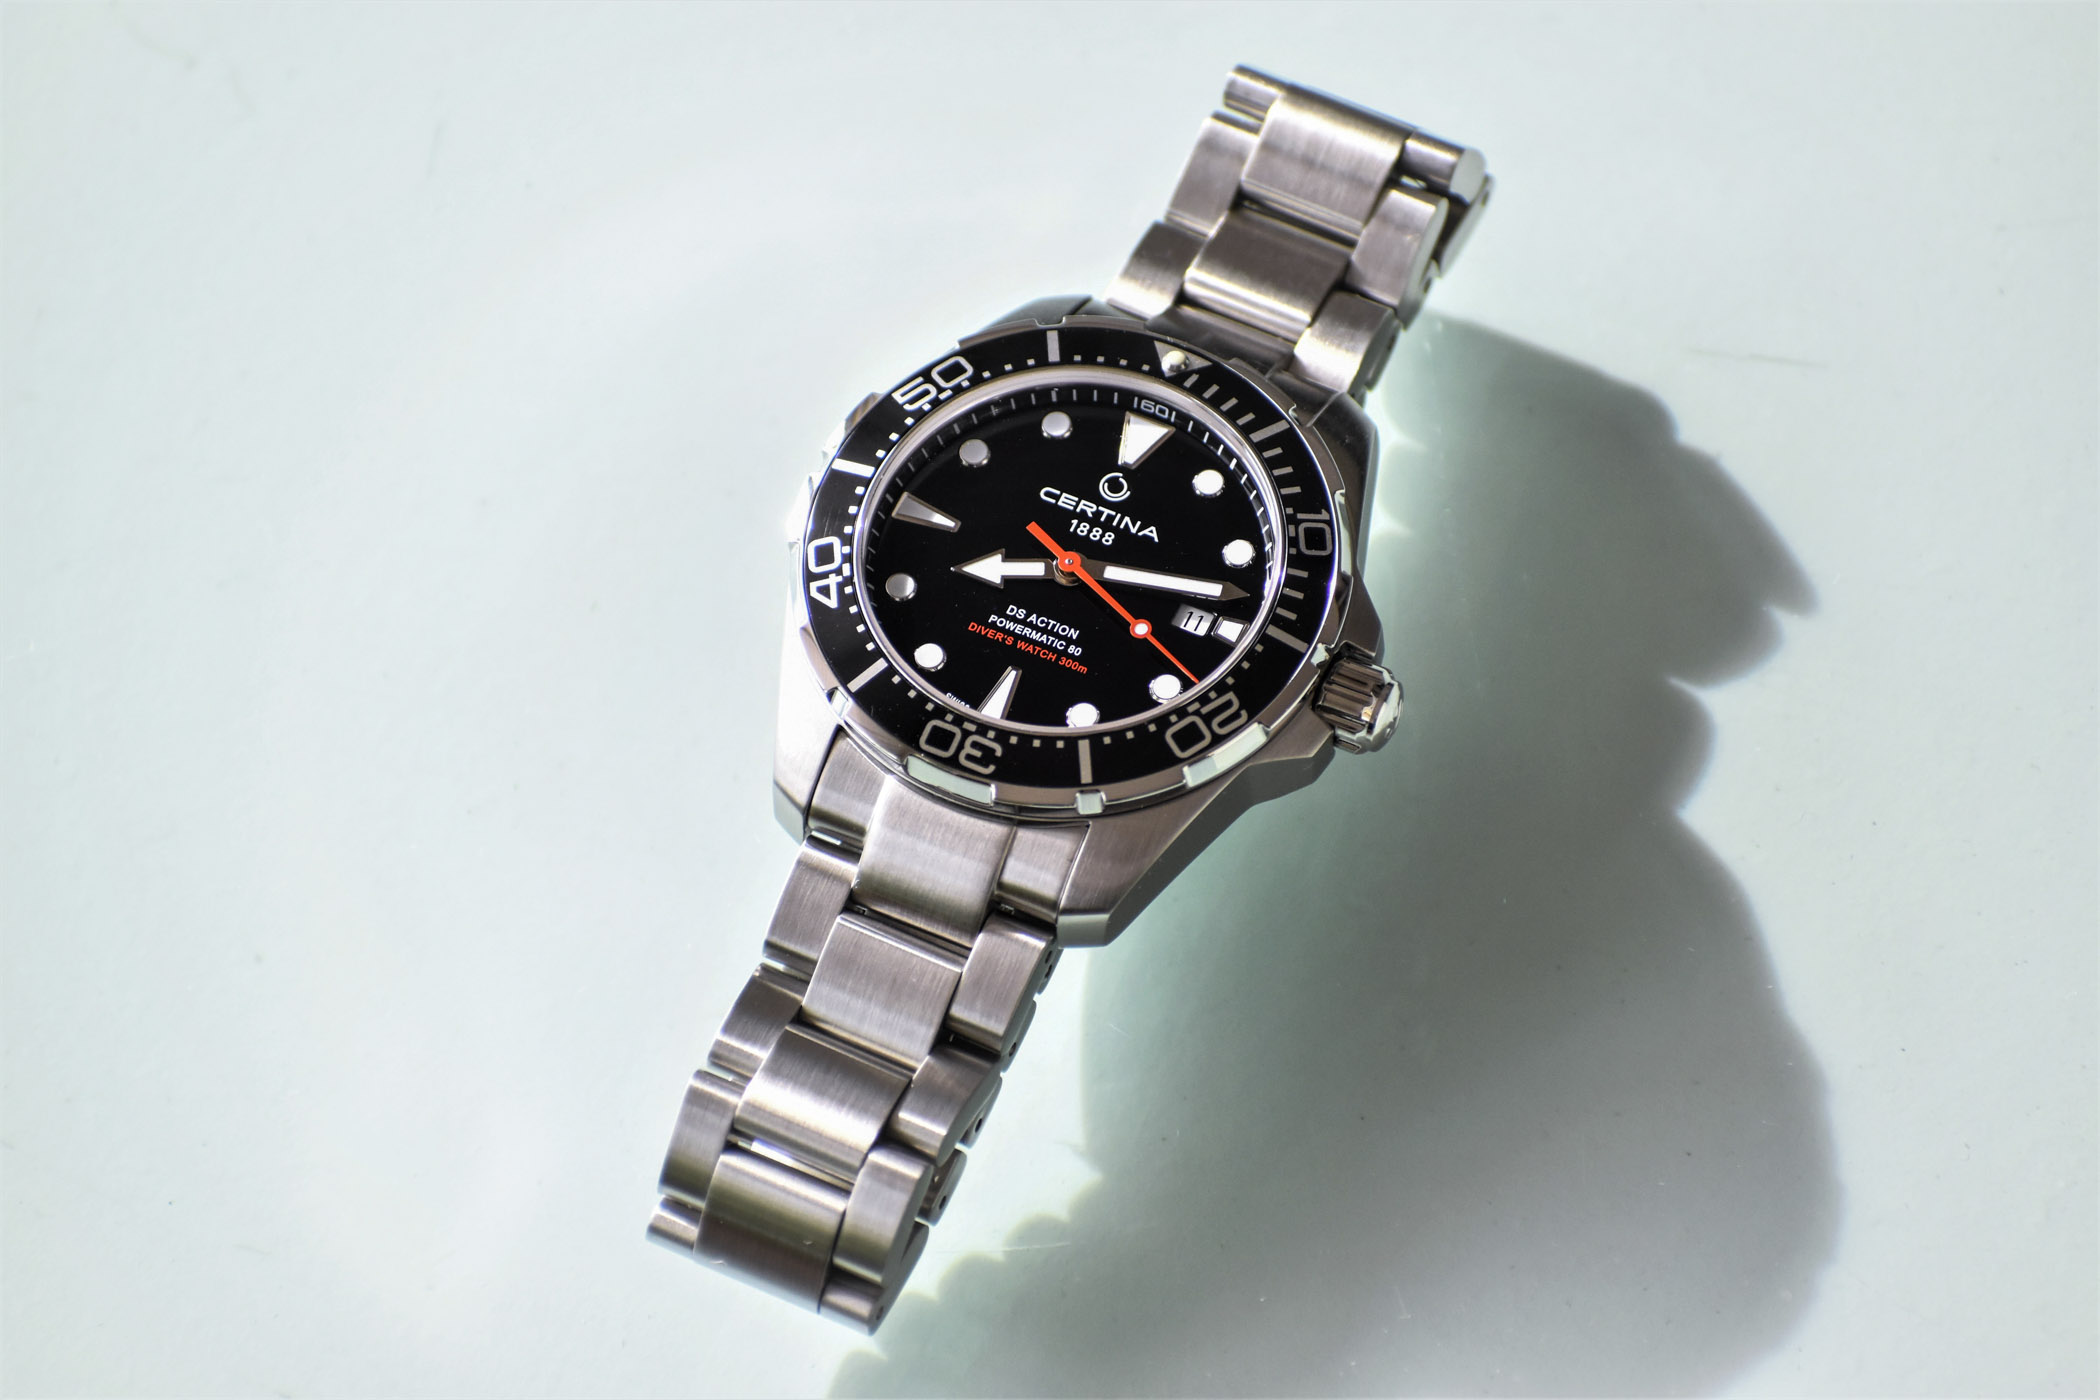 Buying Guide - 3 Watches from Certina Hamilton Tissot with Powermatic movement